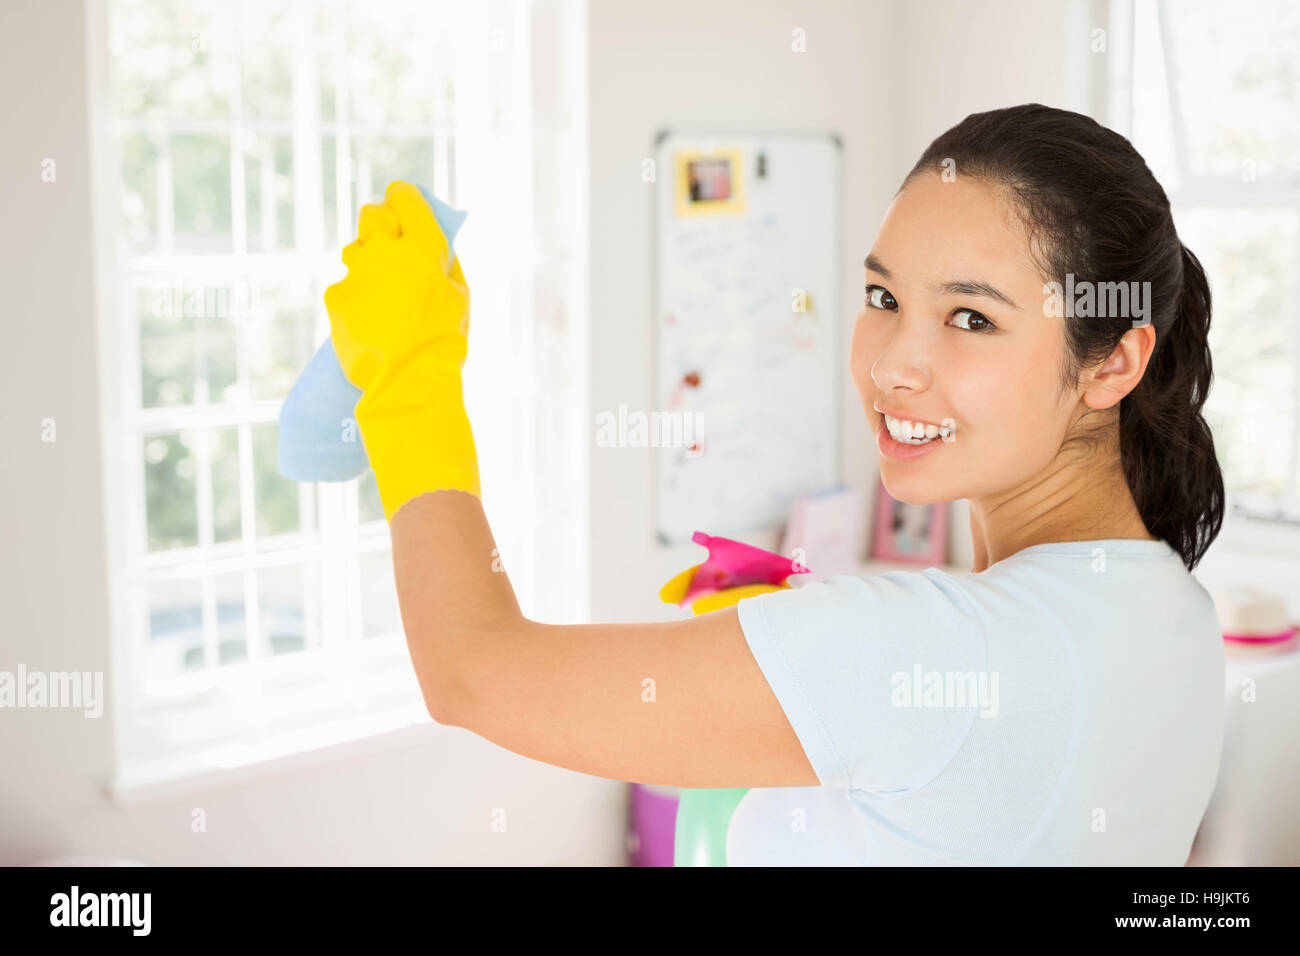 Composite image of smiling woman cleaning walls Stock Photo